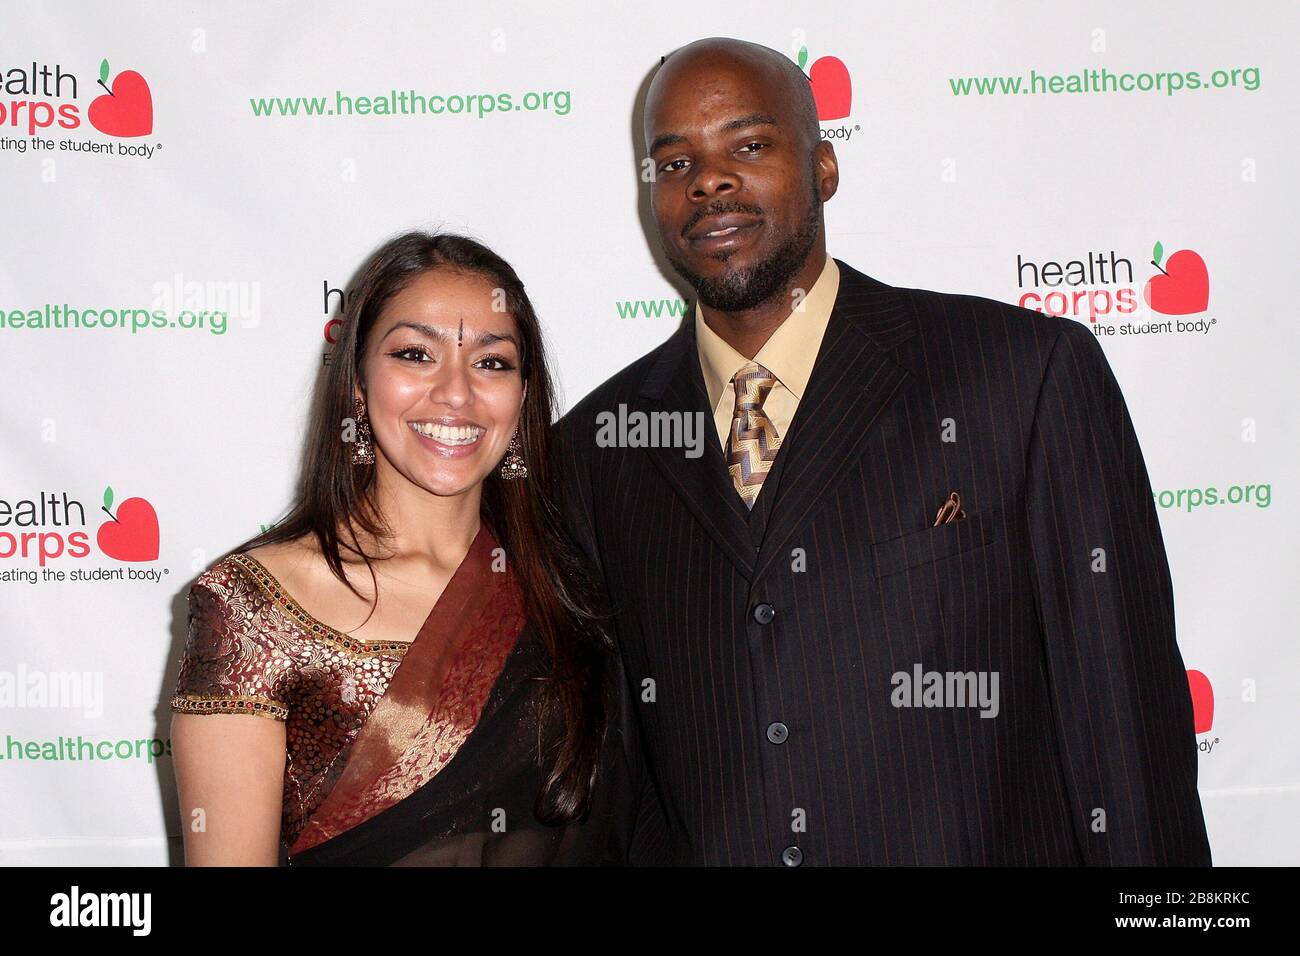 New York, NY, USA. 21 April, 2010. Divya Dileep, Dawed West at the 'Garden of Good & Evil' presented by Dr. Oz at Pier Sixty at Chelsea Piers. Credit: Steve Mack/Alamy Stock Photo